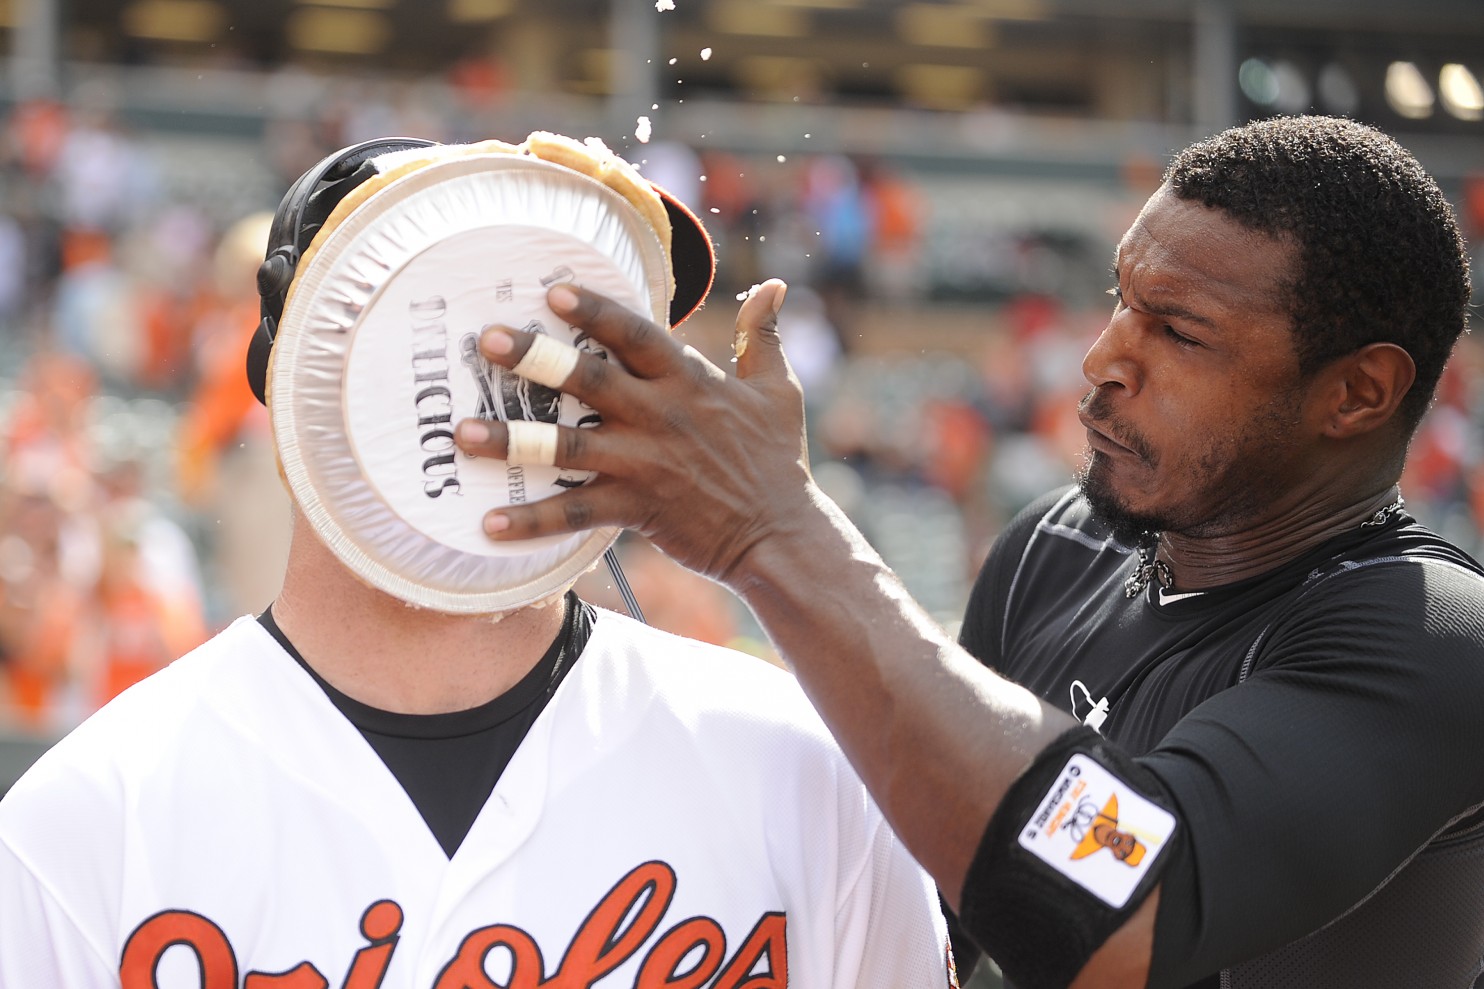 baseball player with pie in face by other team members hand